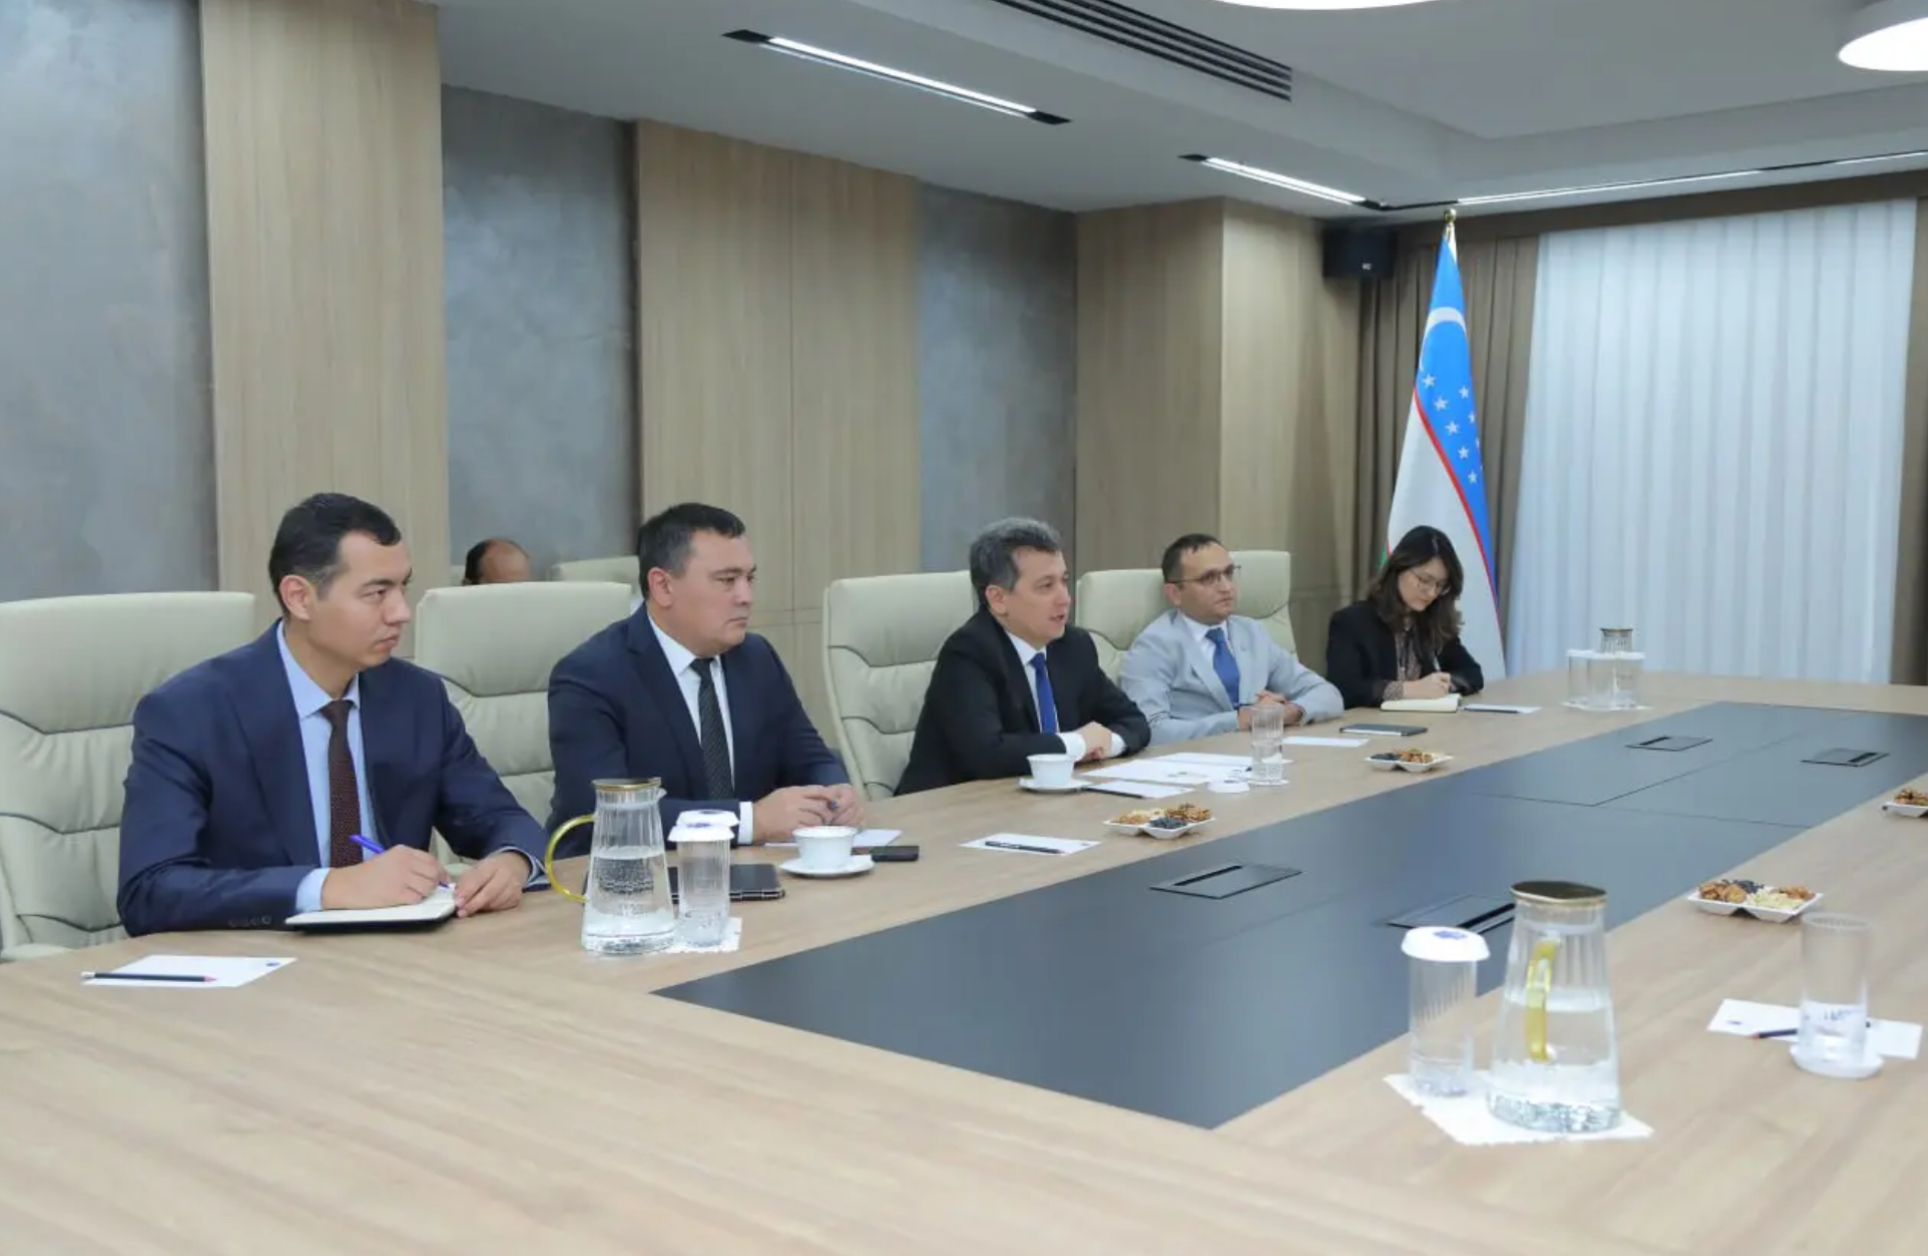 Uzbekistan and UK forge digital partnership: charting new frontiers in telecommunications and innovation 